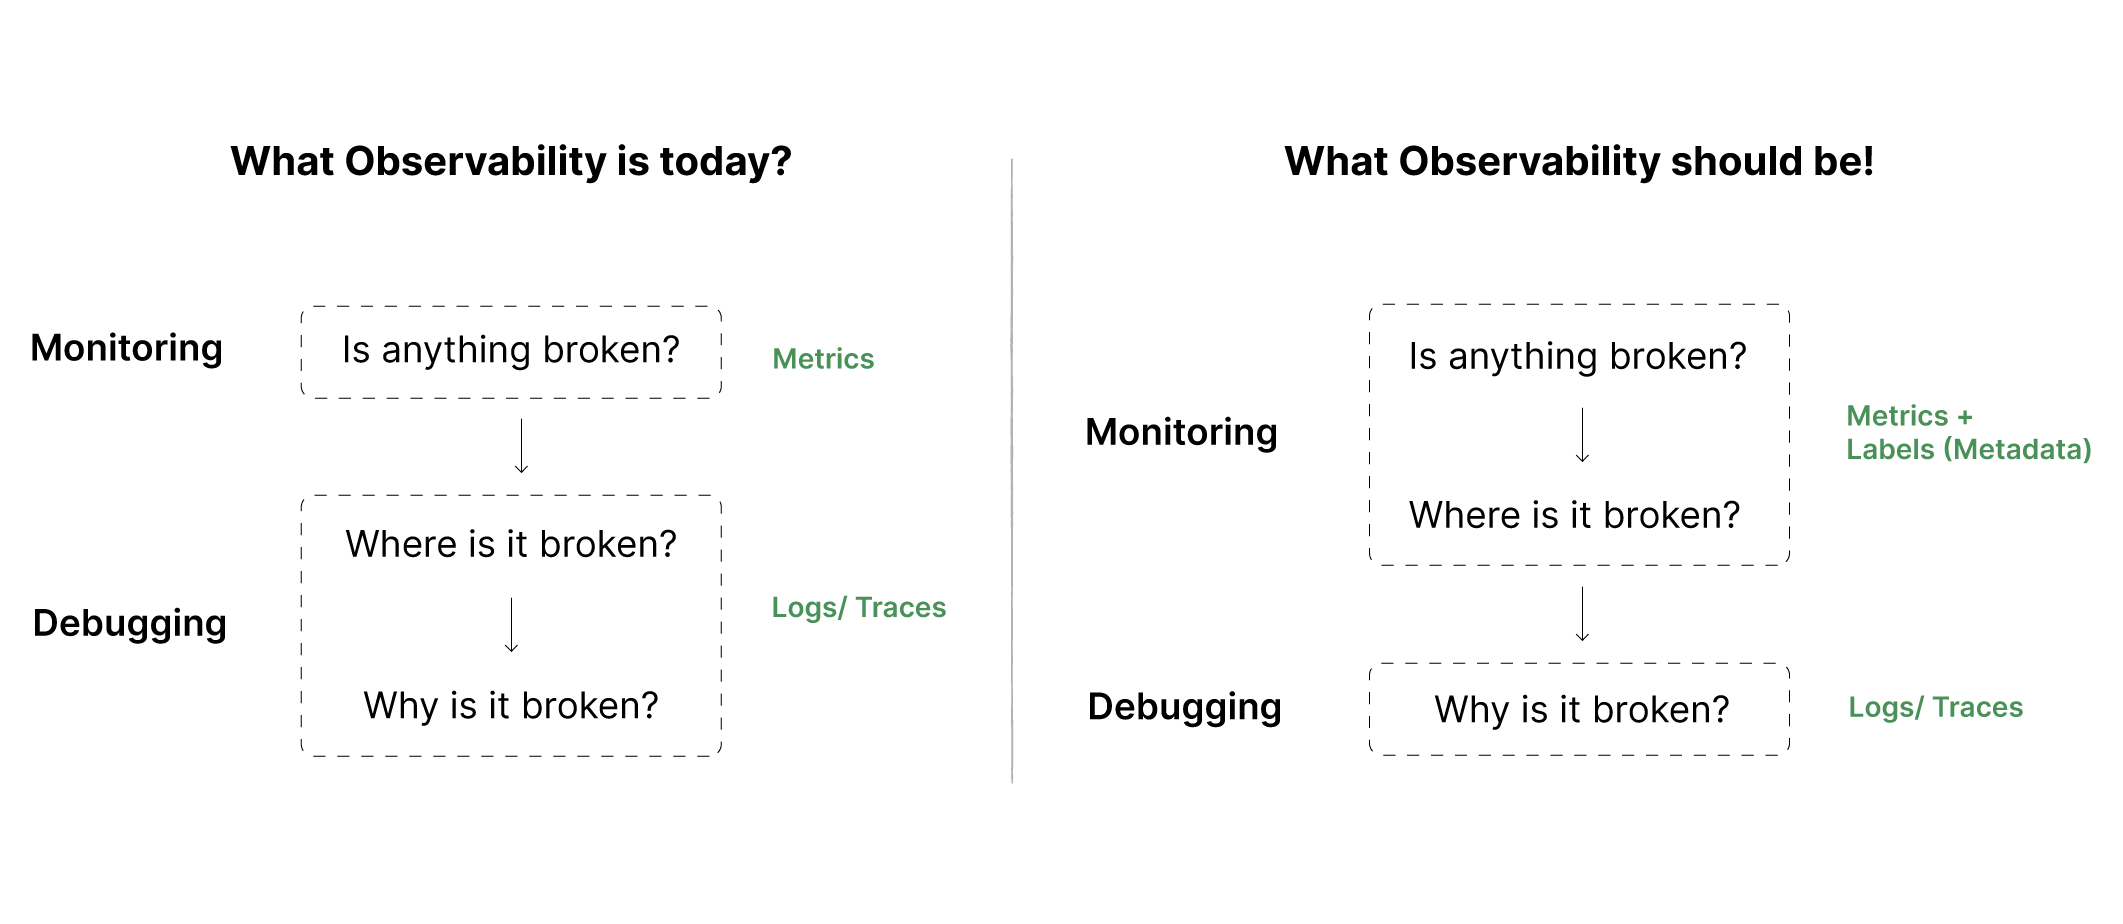 What Observability should be..